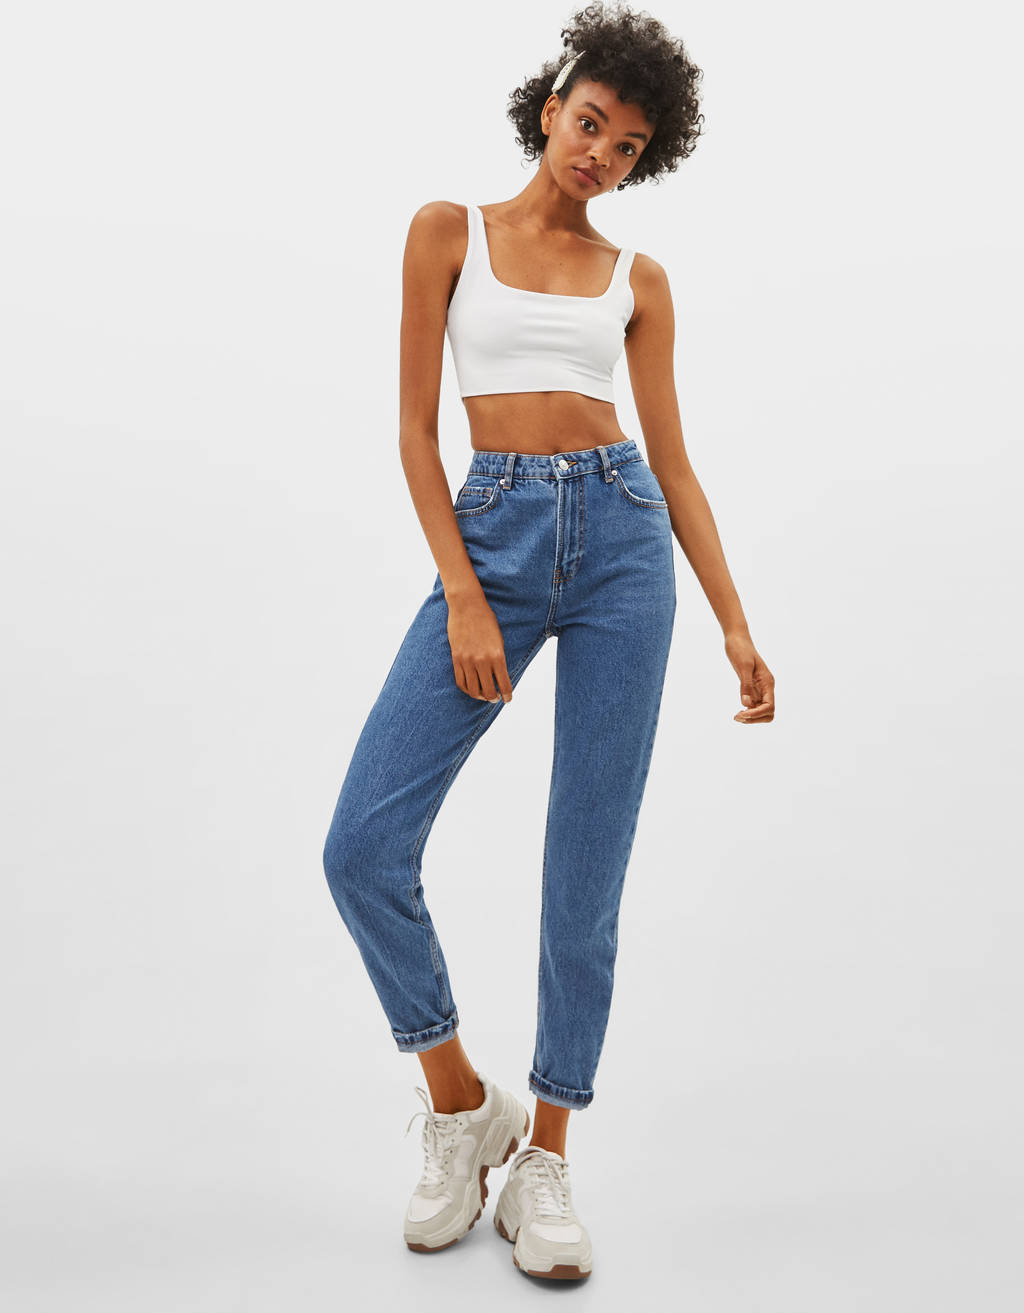 levis jeans womens price